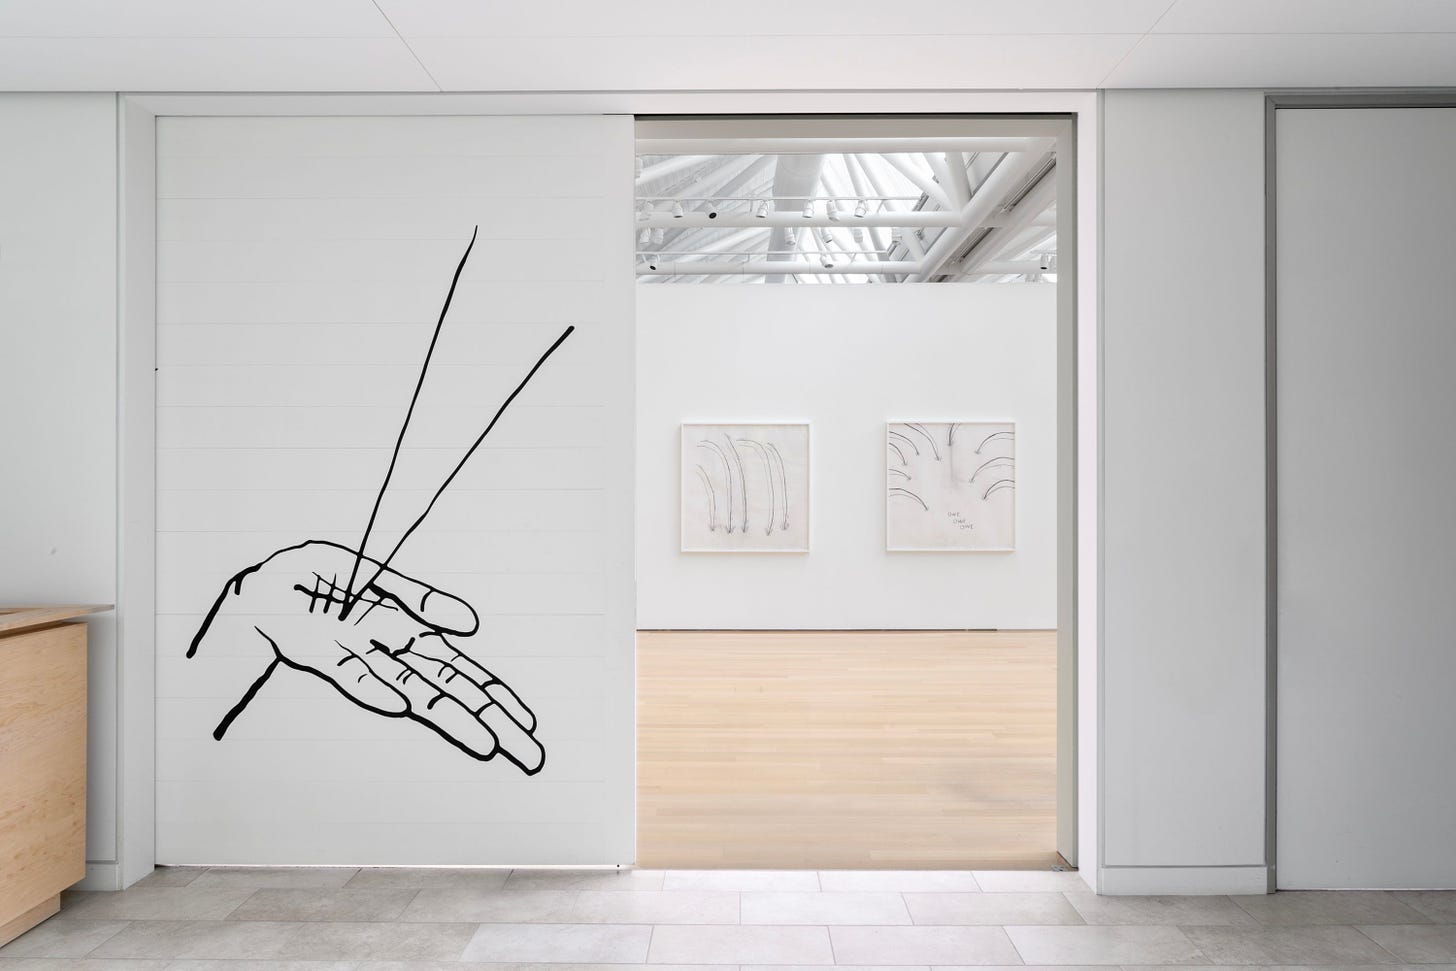 Installation view of a doorway inside a white-walled gallery. On one door, there’s a drawing of a hand with two lines leaping out. Inside, there are two works on a wall, too far away to know detail.